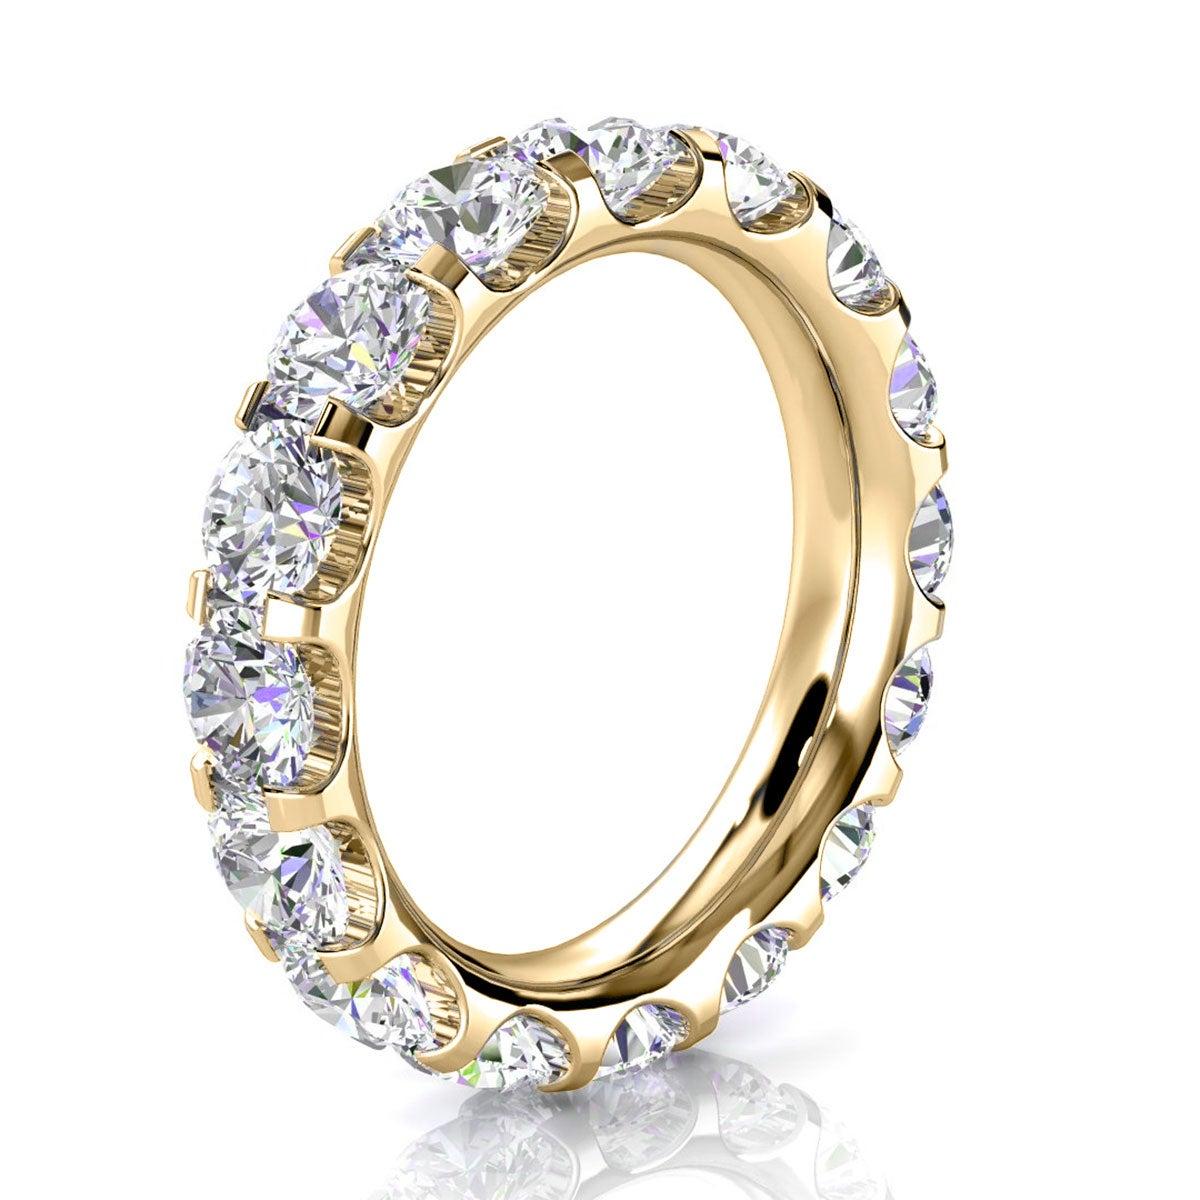 For Sale:  18k Yellow Gold Viola Eternity Micro-Prong Diamond Ring '4 Ct. Tw' 2